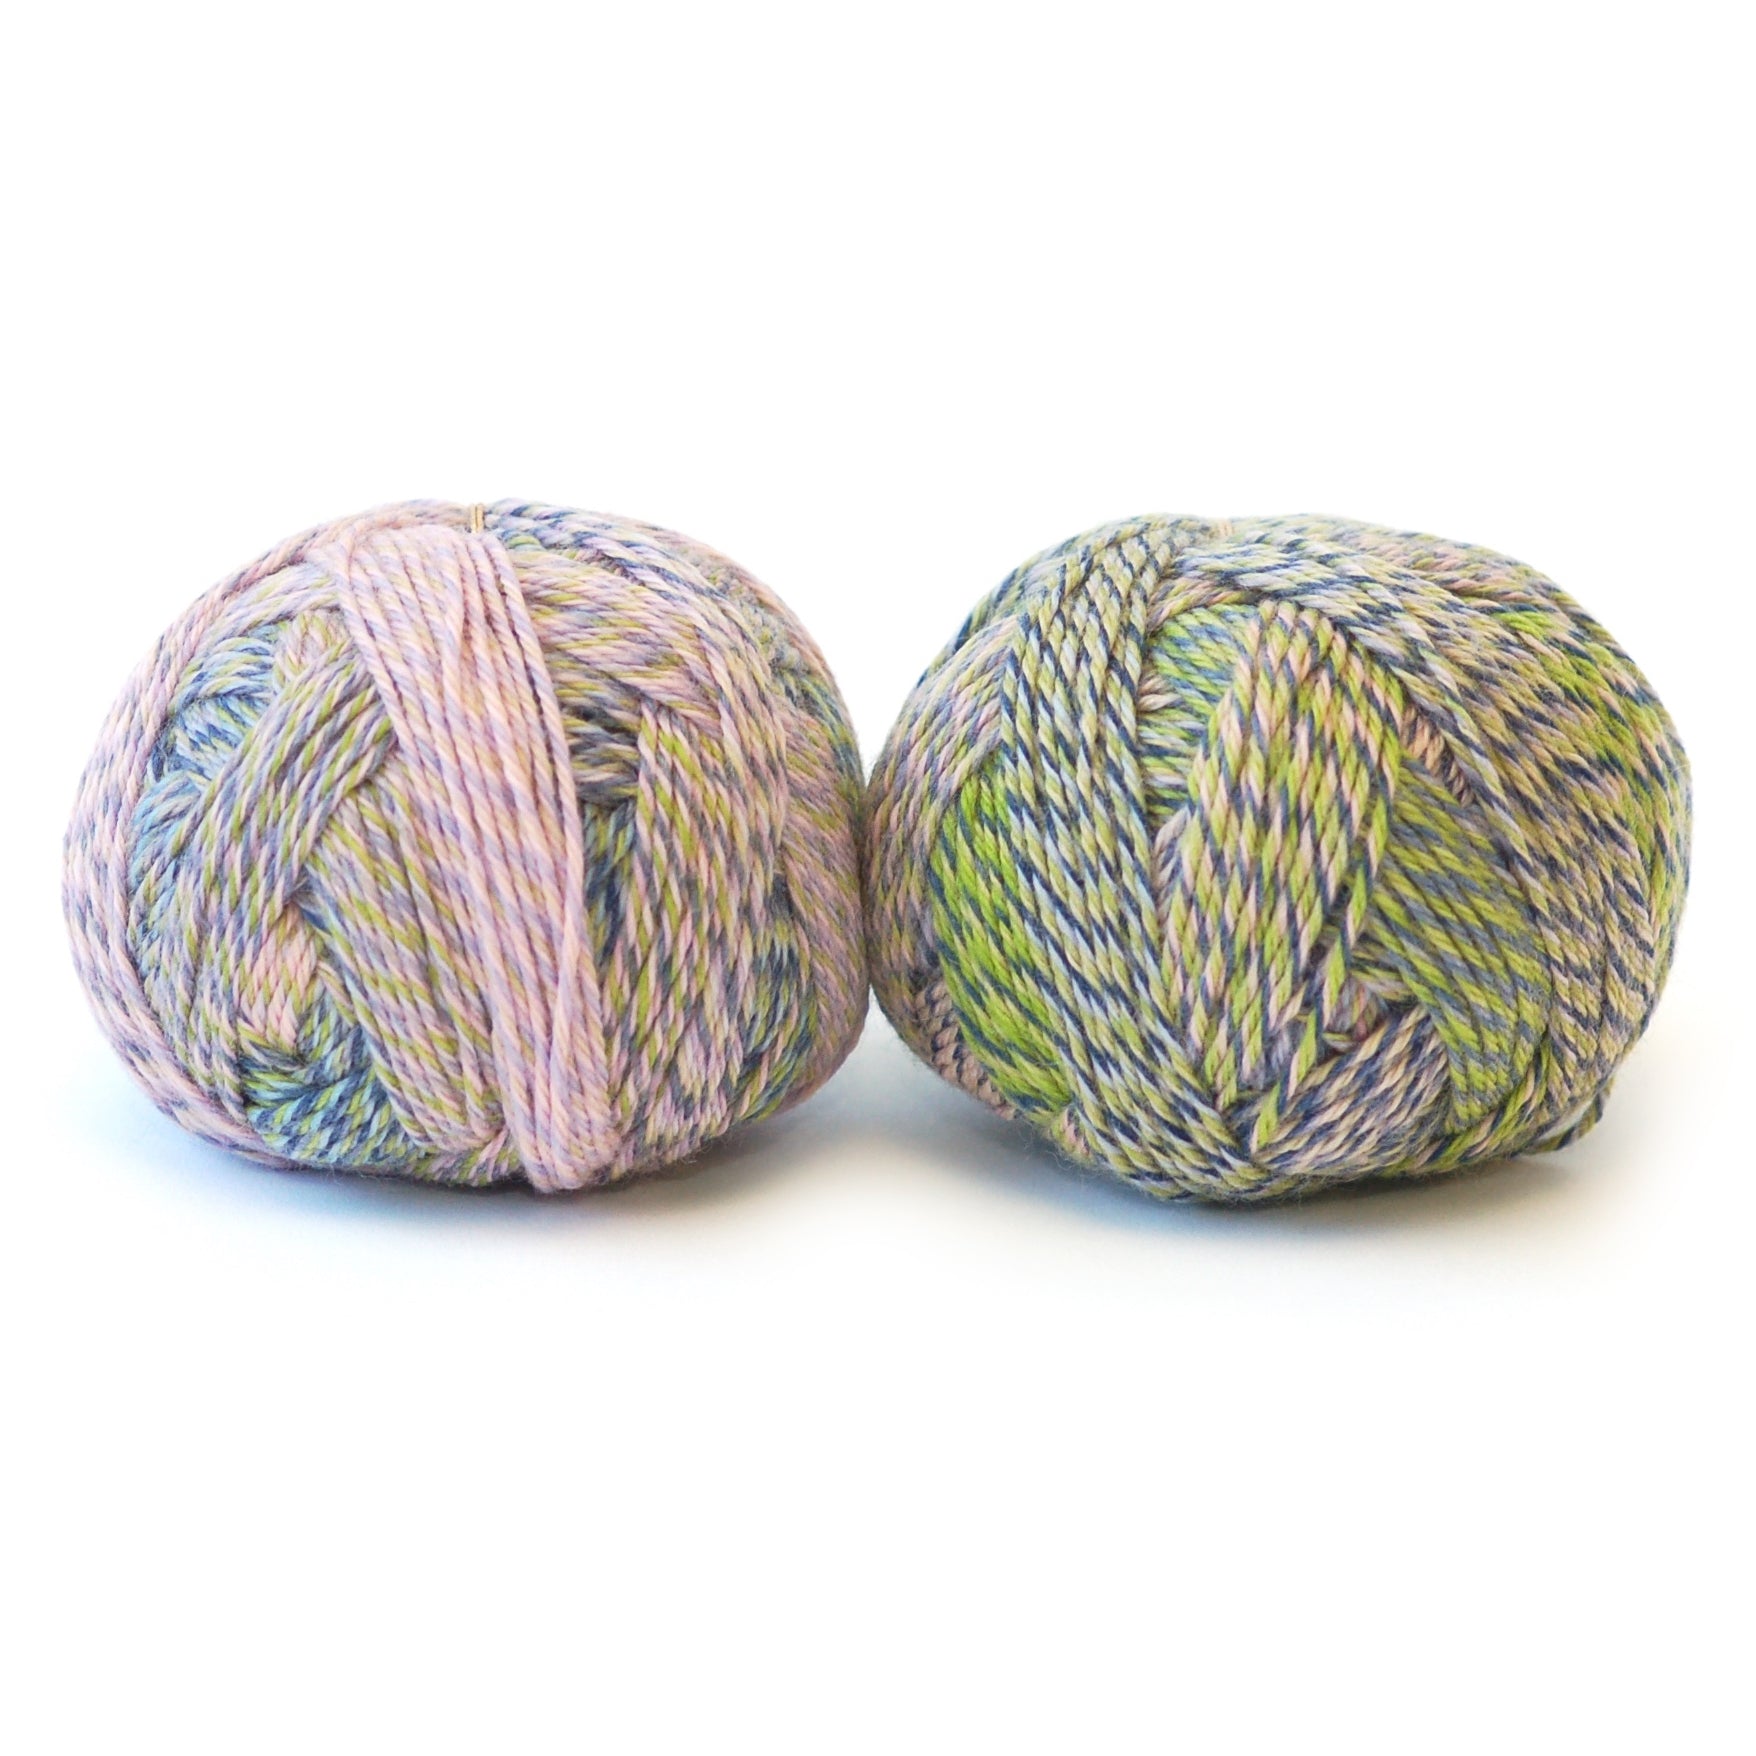 Schoppel-Wolle Edition 3 wool yarn colors of Easter